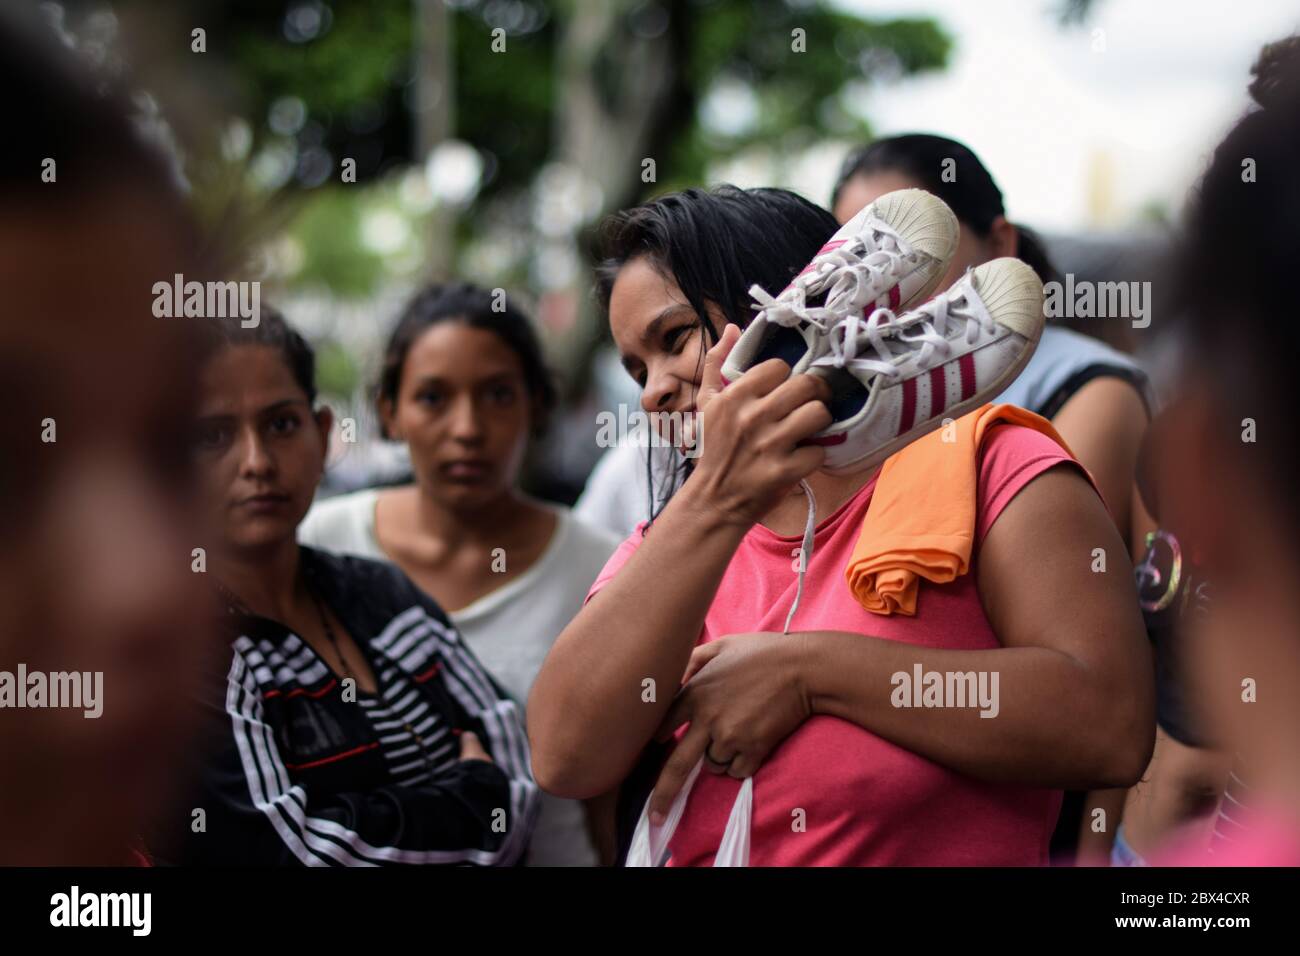 Group of stranded Venezuelan women gather to distribute privately donated clothes in the makeshift camp created amid Covid-19 pandemic, where they wai Stock Photo